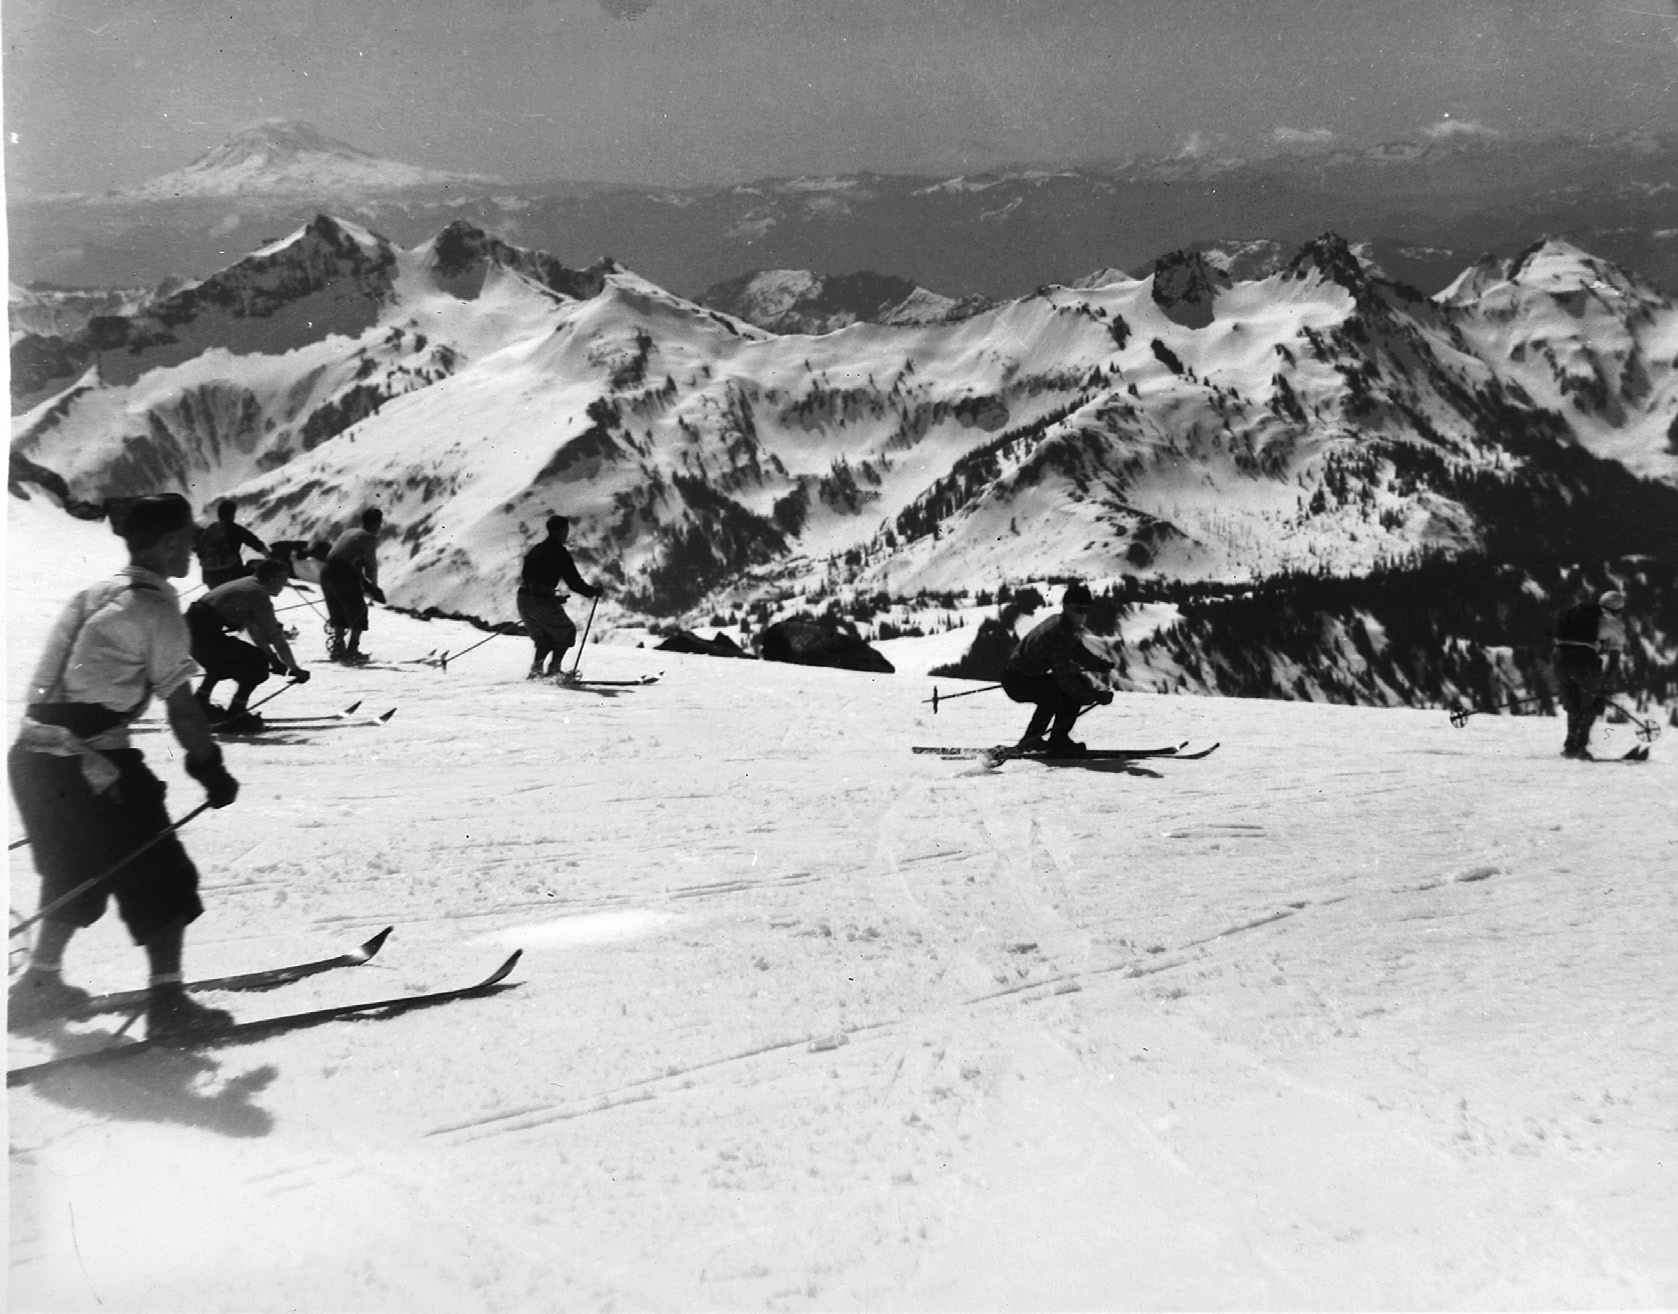 Retro Rewind | The 1934 Silver Skis Race — The Mountaineers